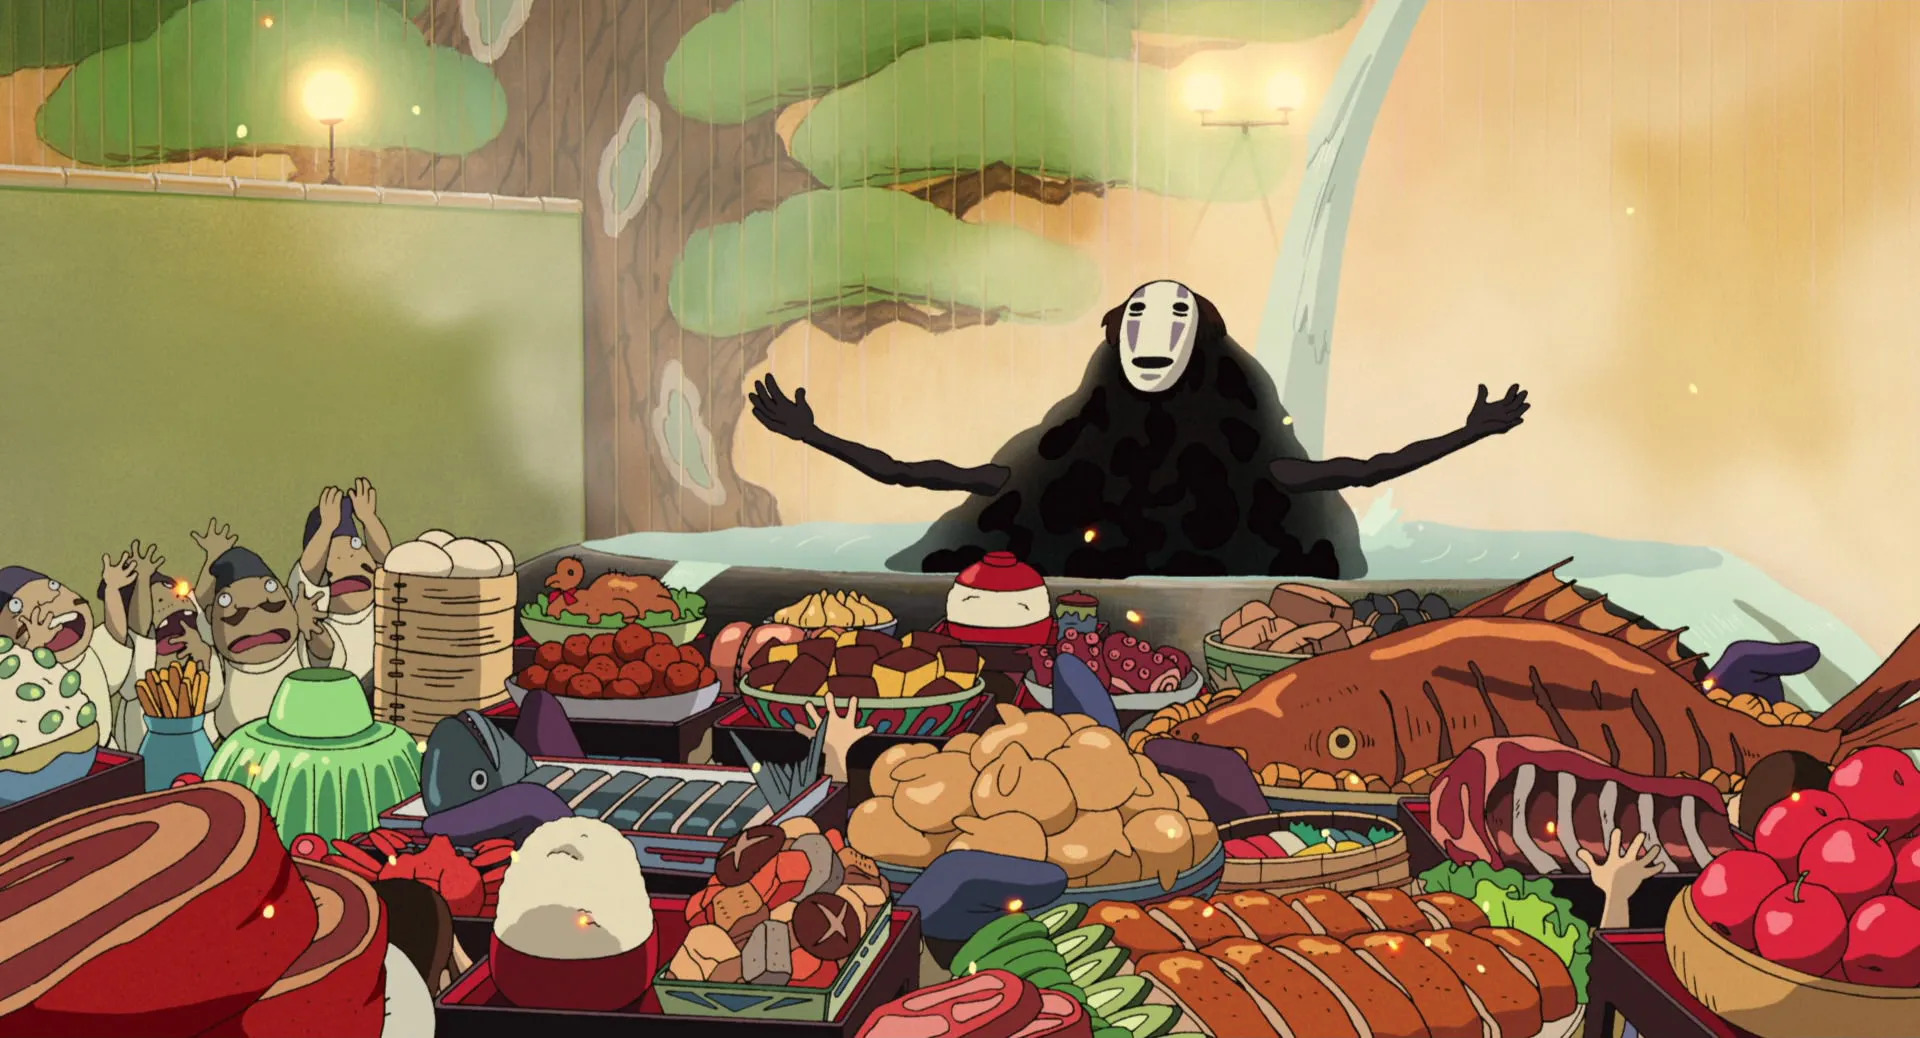 No-Face gloating over a floating table of food in Spirited Away.